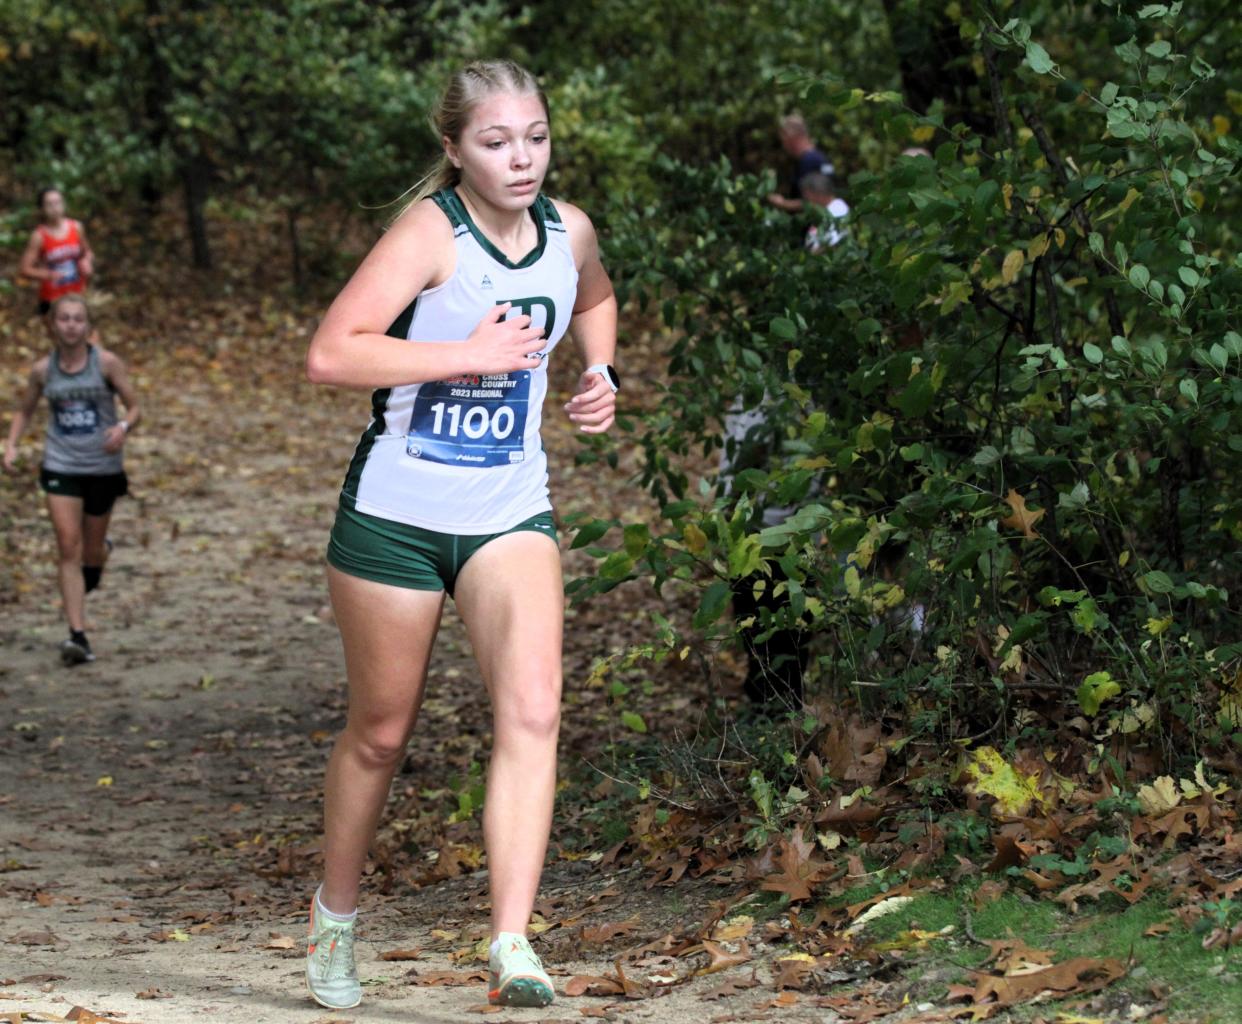 Rowan Allen of Mendon finished third overall at the regional held on Friday afternoon.